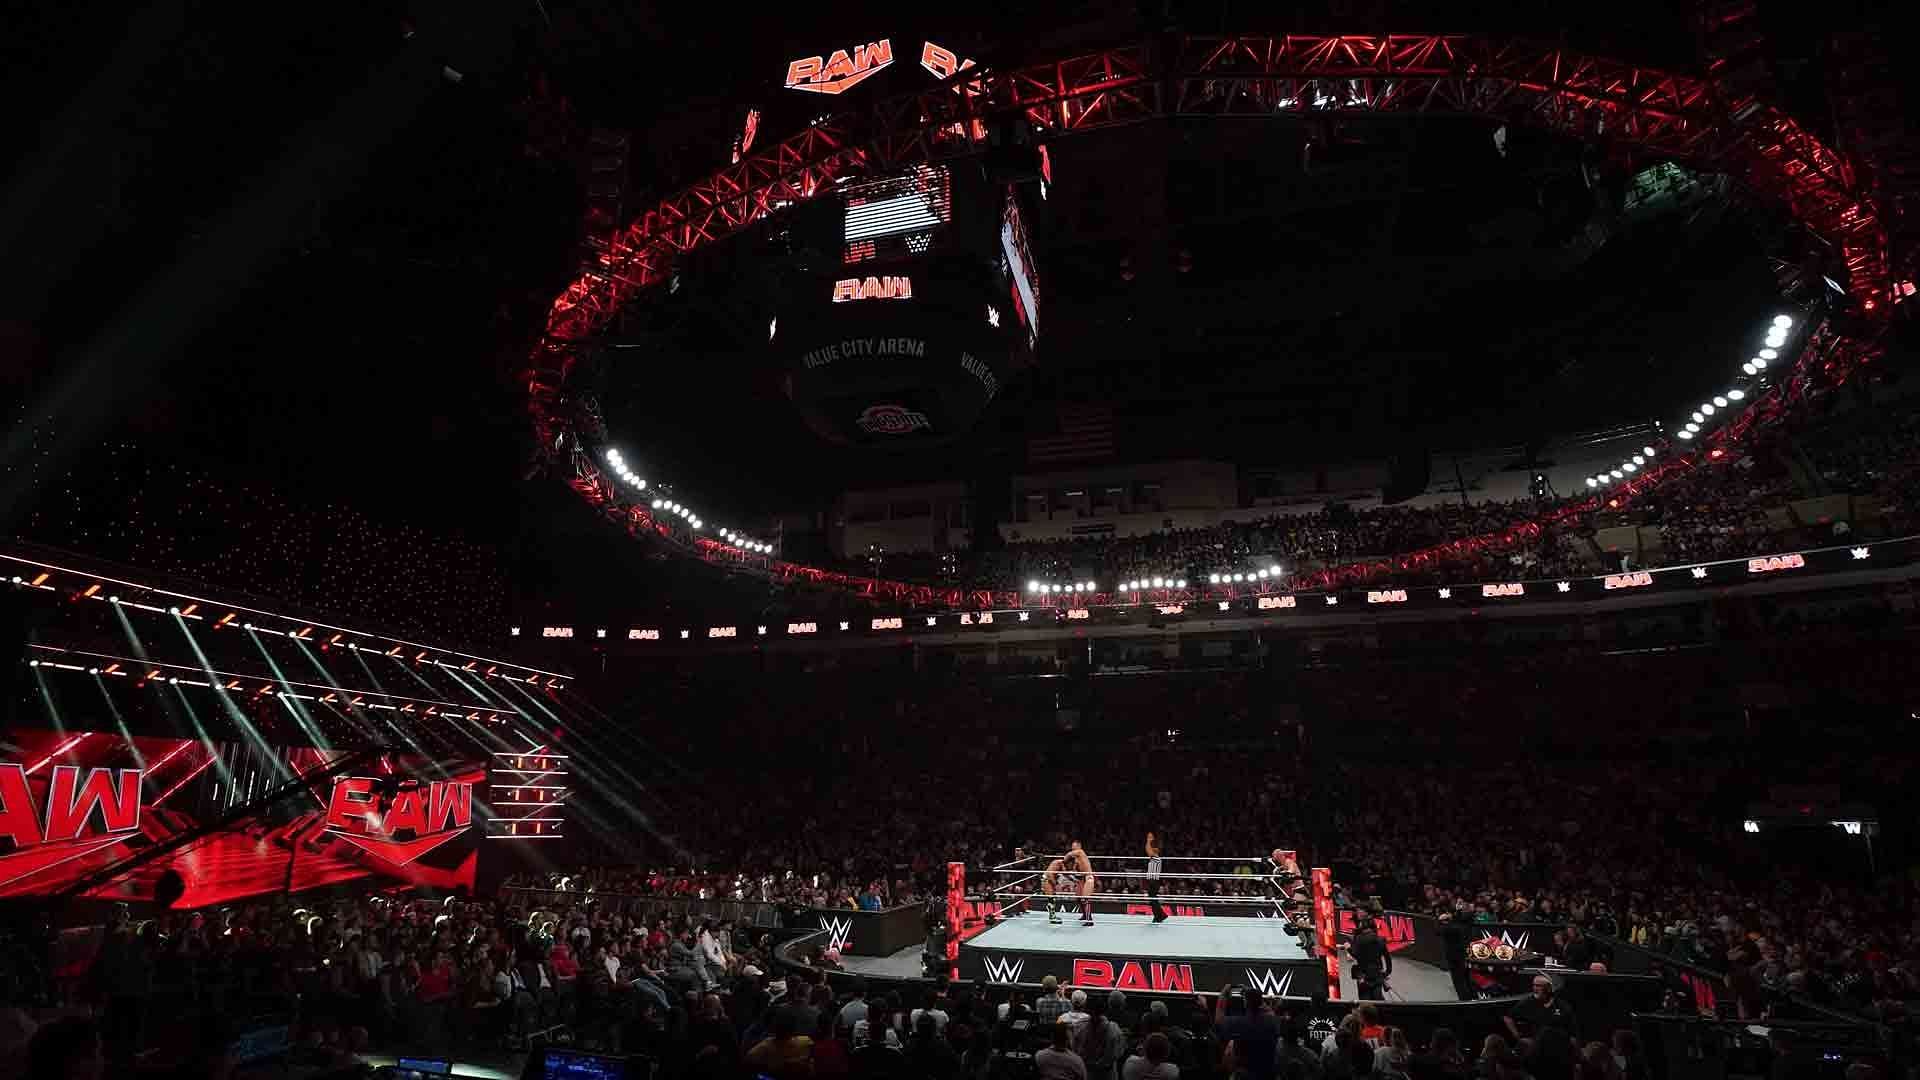 The WWE Universe packs local arena for live RAW episode